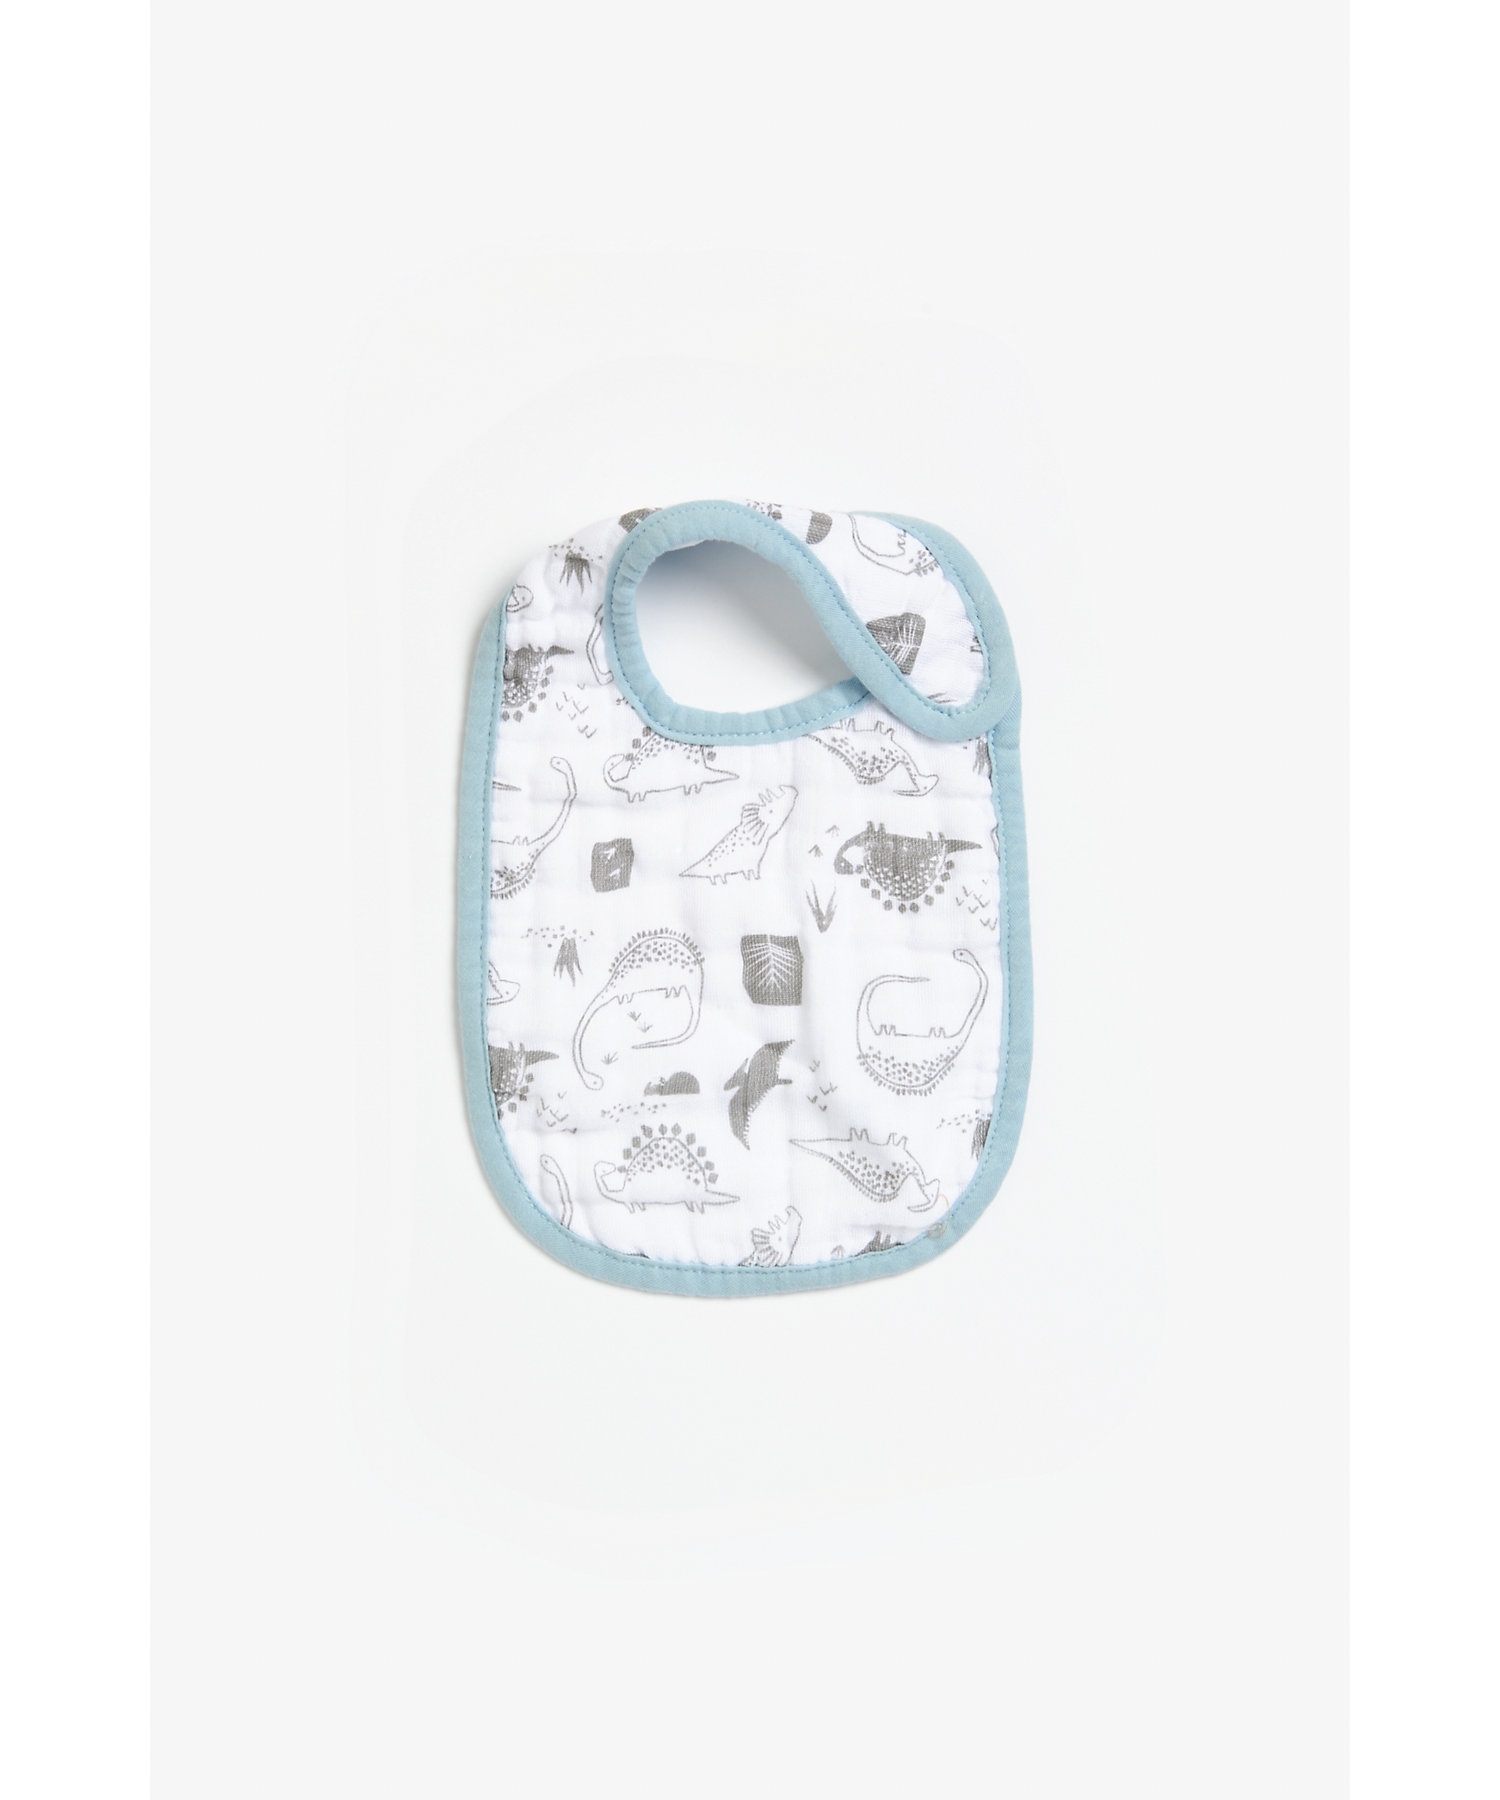 Mothercare | Mothercare Dino Muslin Bibs Blue Pack of 3 3